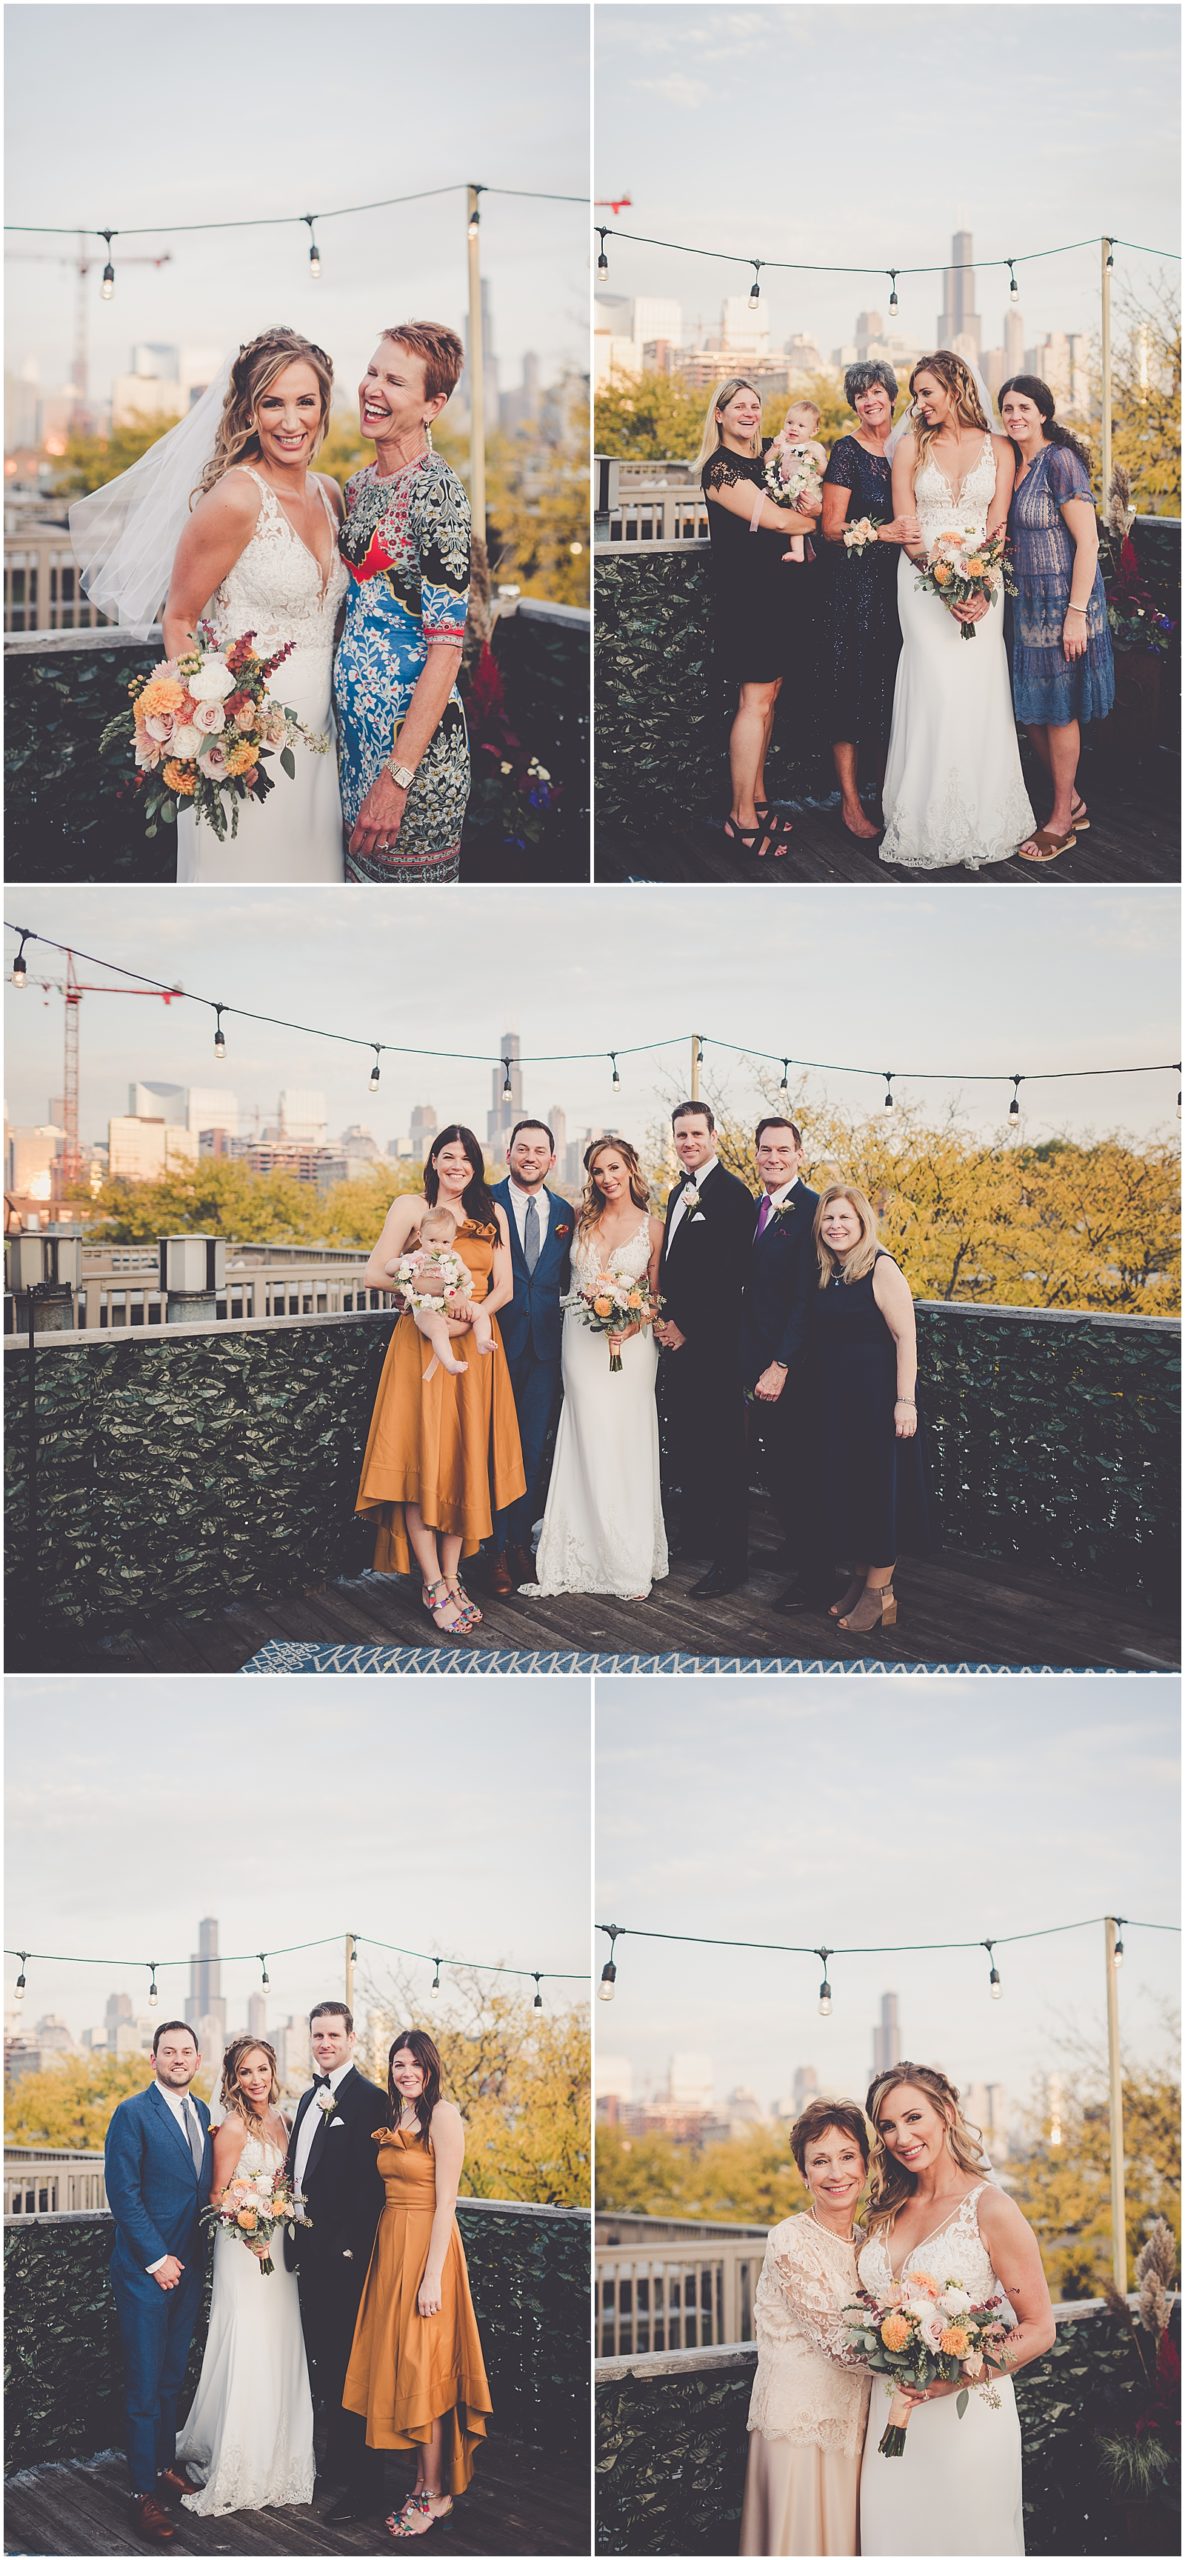 Advice for planning stress-free family formal photos on your wedding day with Chicagoland wedding photographer Kara Evans Photographer.